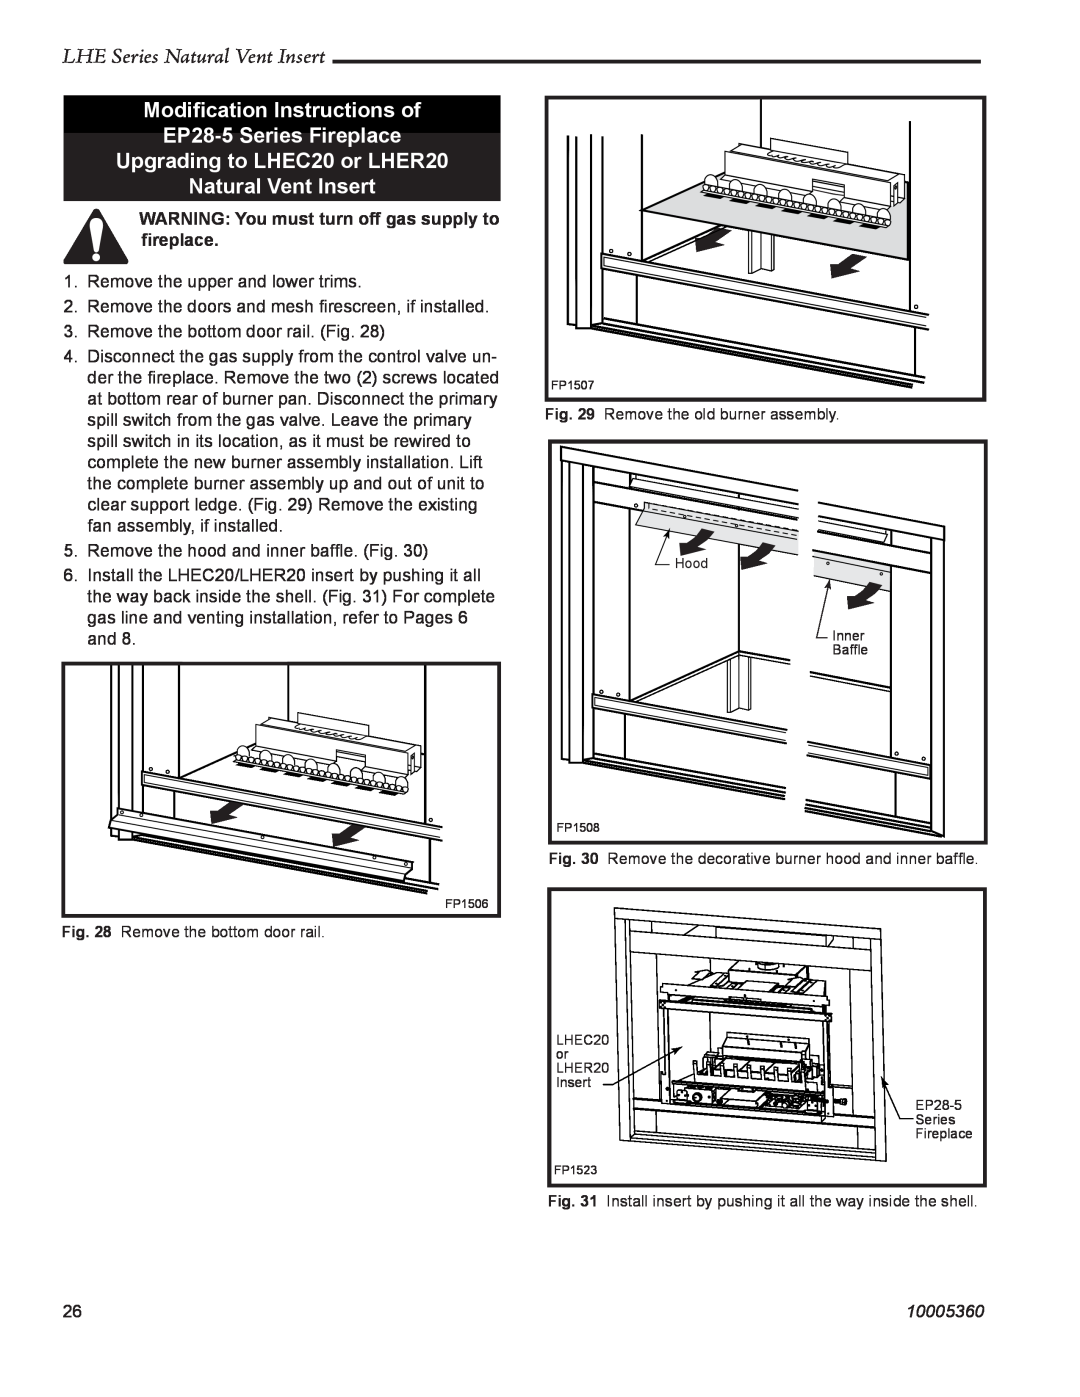 Vermont Casting LHER20 manual Modiﬁcation Instructions of EP28-5 Series Fireplace, LHE Series Natural Vent Insert, 10005360 